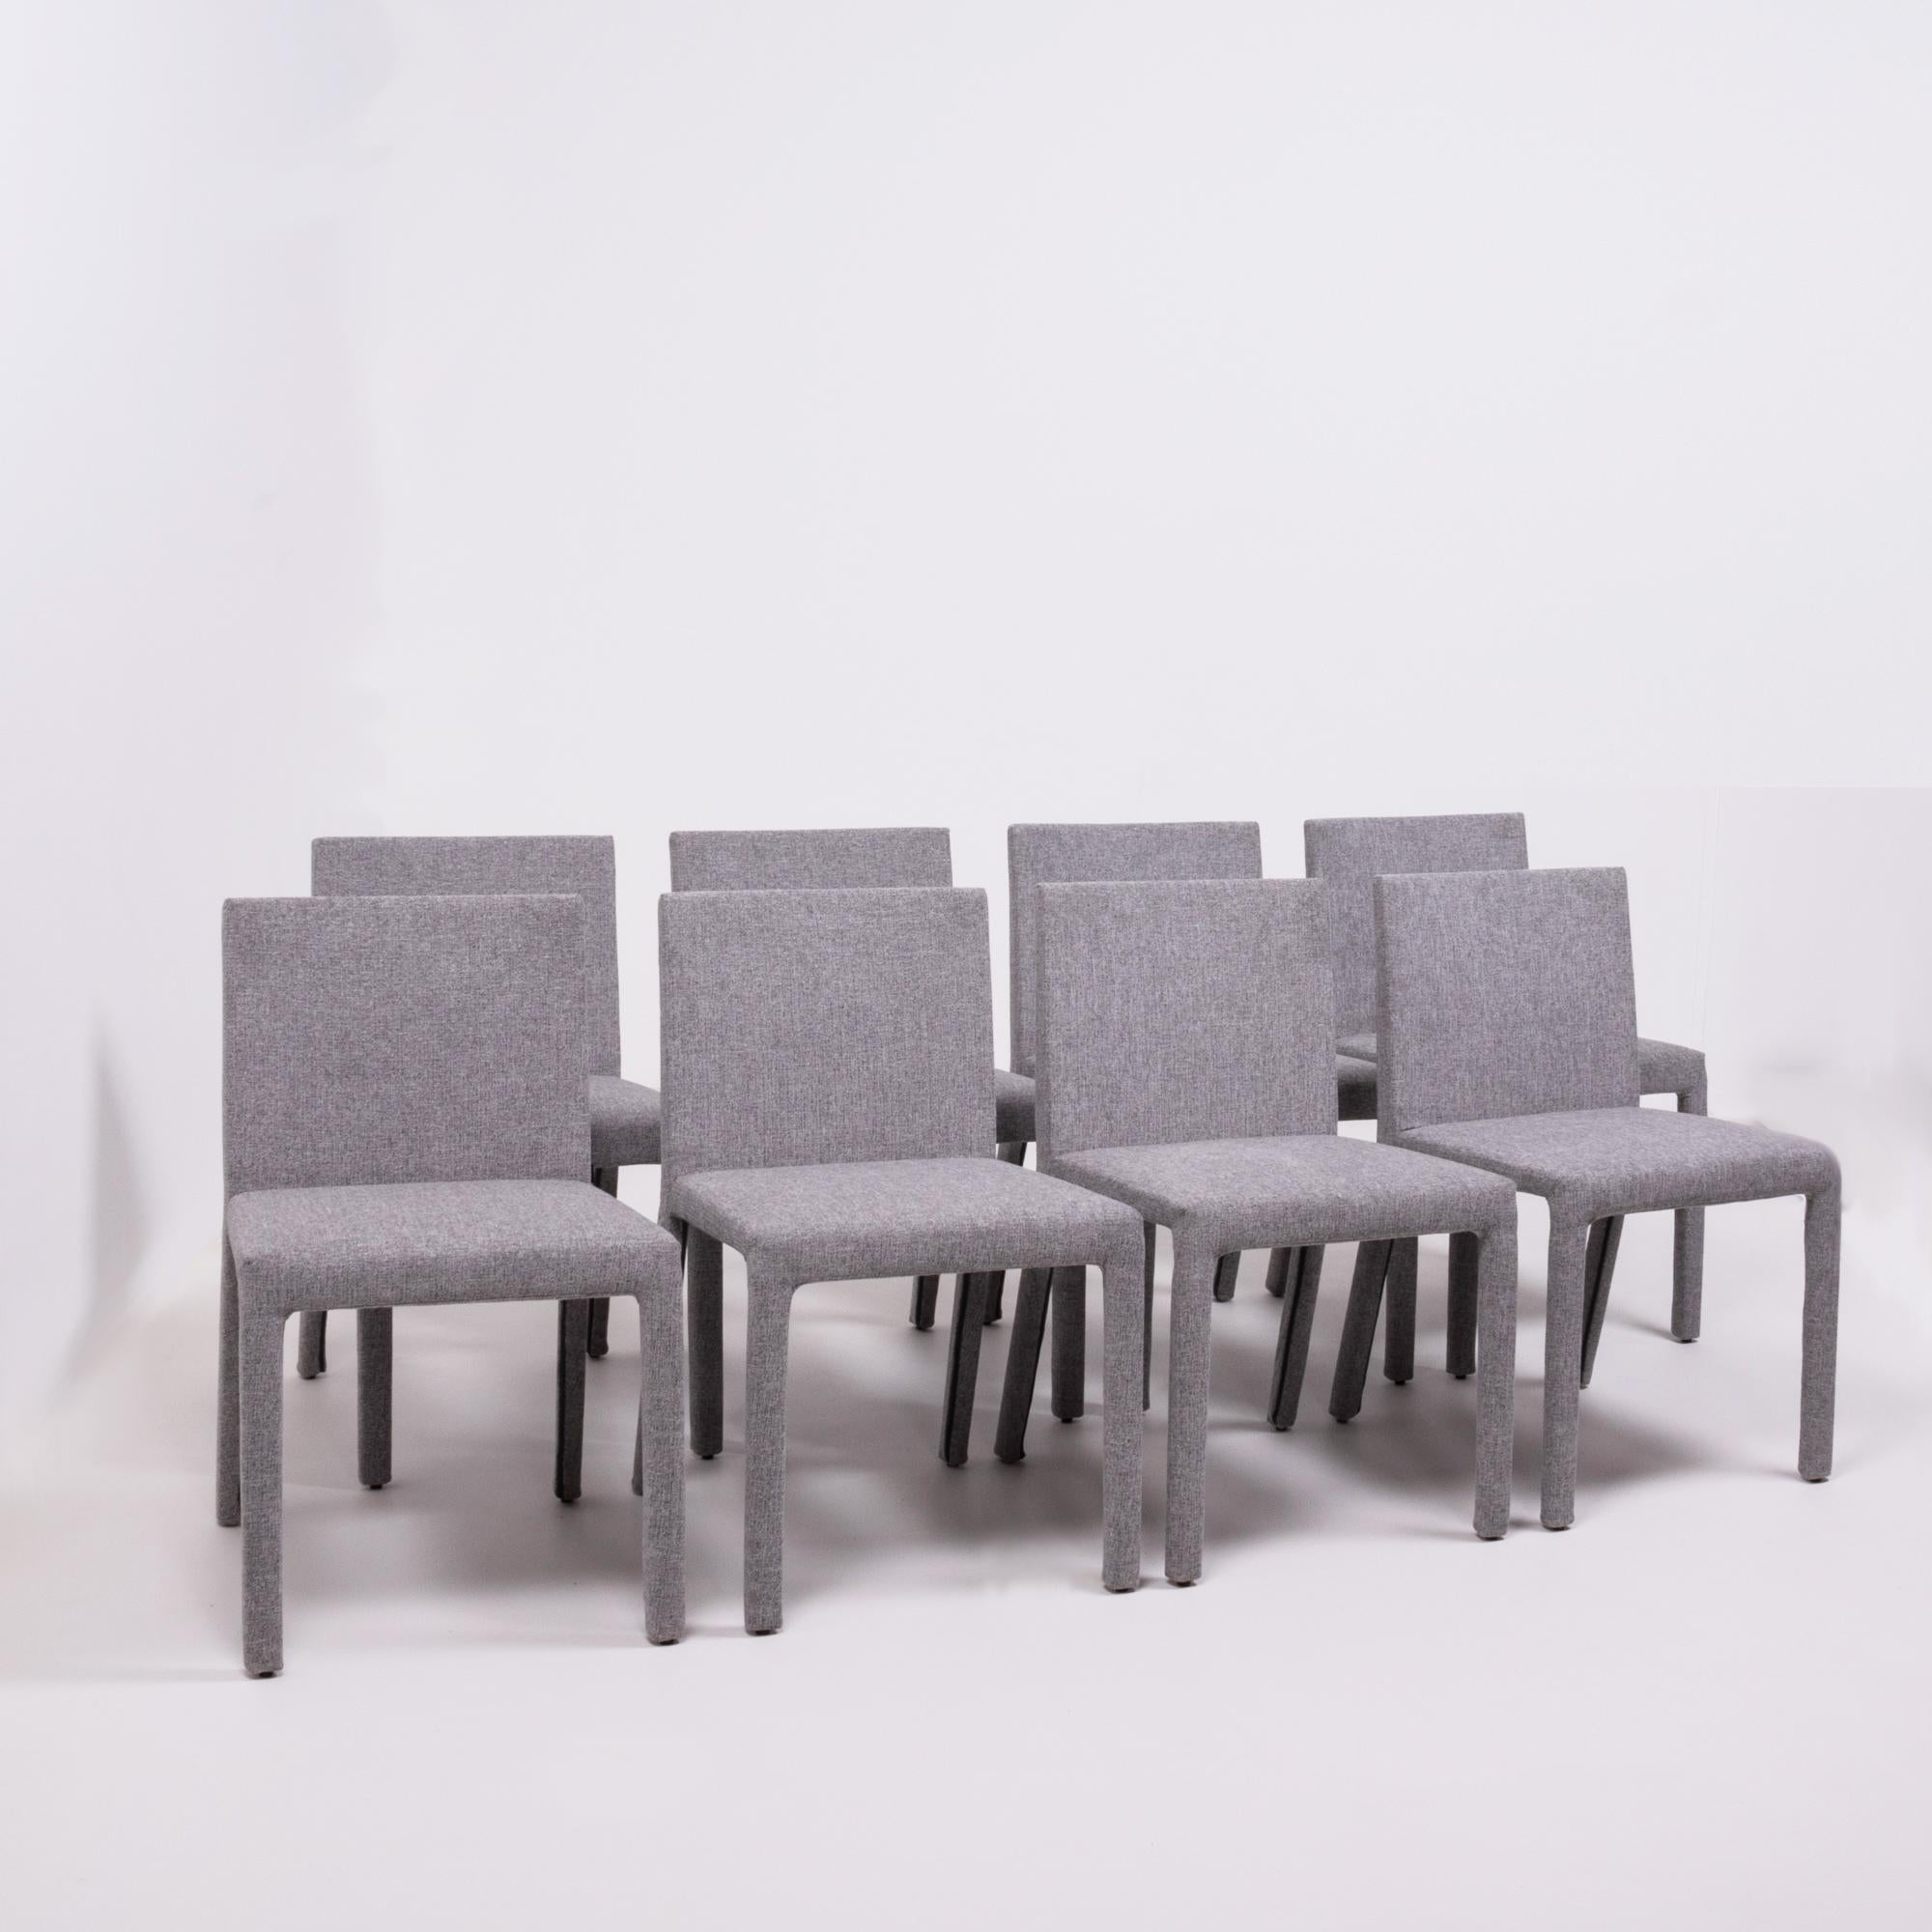 Designed by Carlo Colombo for Poliform in 2004, the Fly Tre chair is both sleek and sophisticated.
Newly and fully reupholstered in grey fabric, this set of eight dining chairs features comfortable padded seats and removable covers.
  